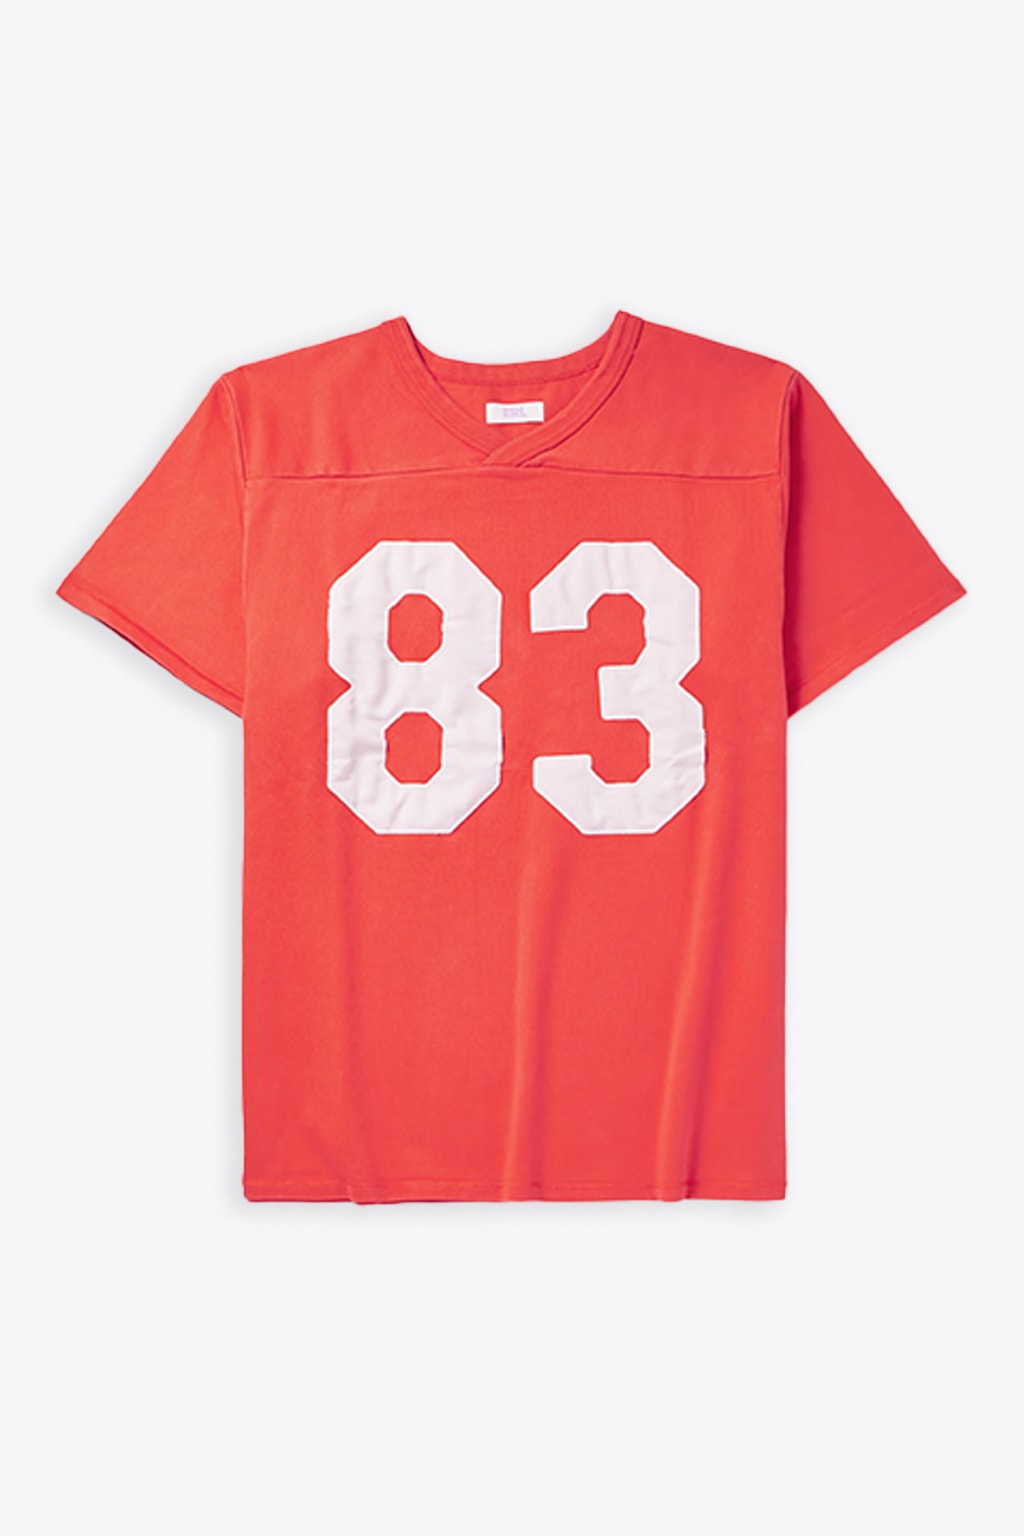 erl unisex football shirt knit coral red cotton football t-shirt - unisex football shirt knit